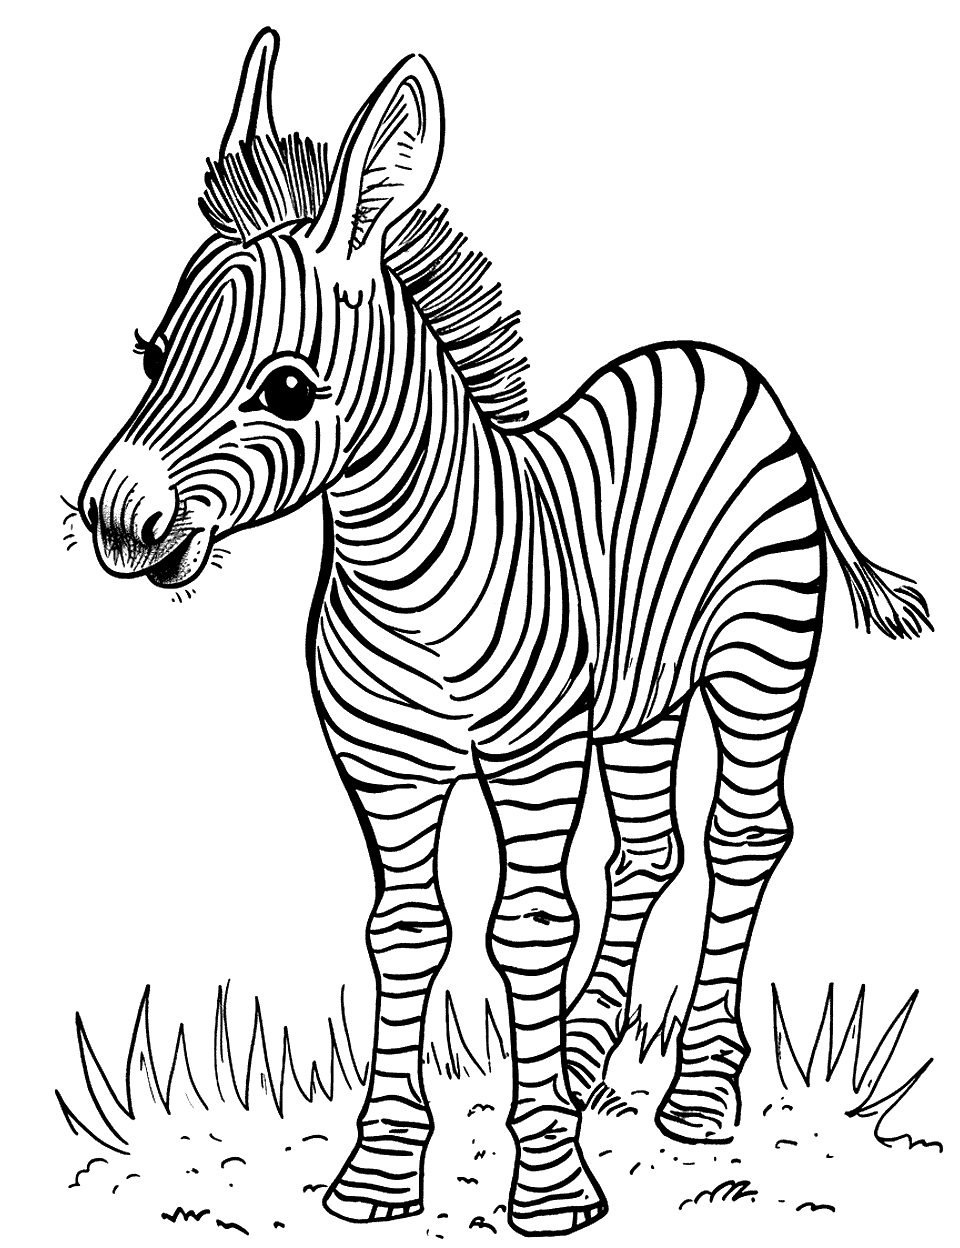 Zebra Foal Learning to Walk Coloring Page - A zebra foal taking its first shaky steps.